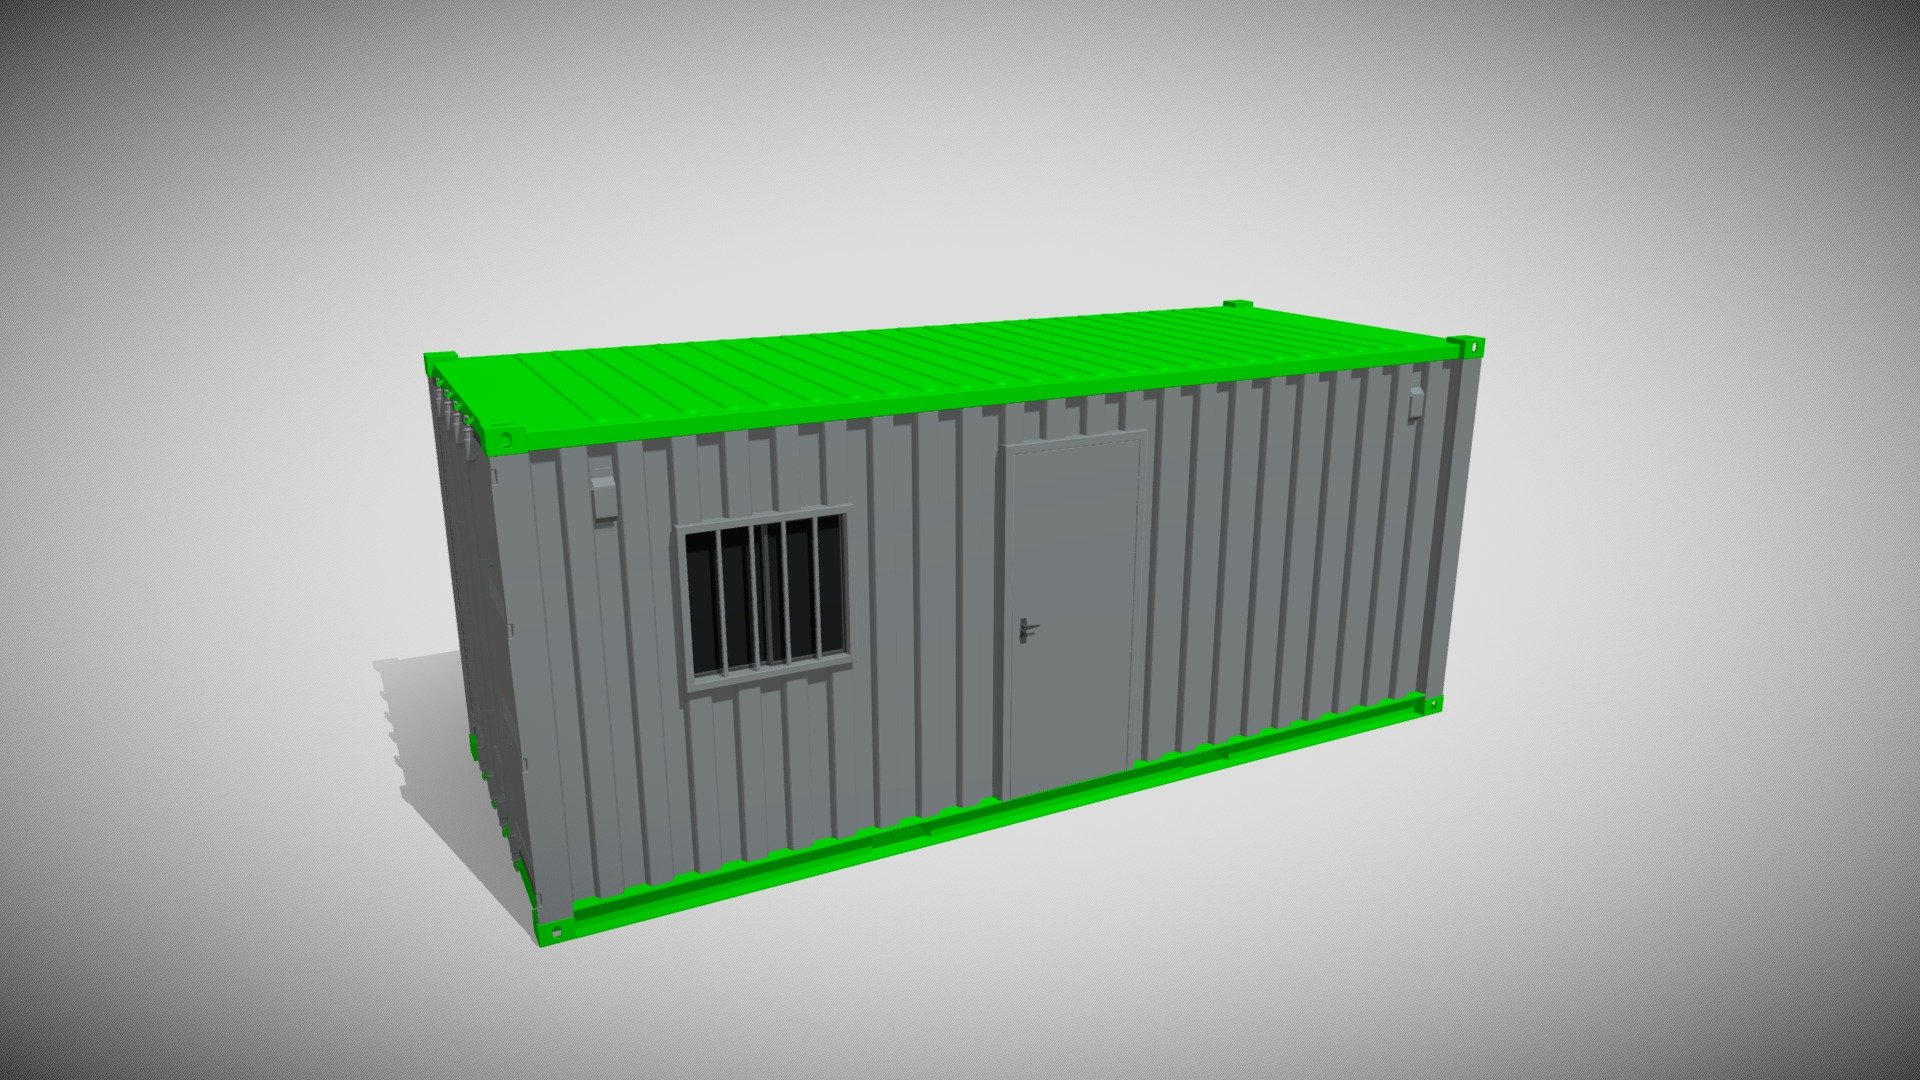 Detailed model of a shipping container office or home, modeled in Cinema 4D.The model was created using approximate real world dimensions.

The model has 182,606 polys and 185,425 vertices.

An additional file has been provided containing the original Cinema 4D project file, textures and other 3d export files such as 3ds, fbx and obj 3d model